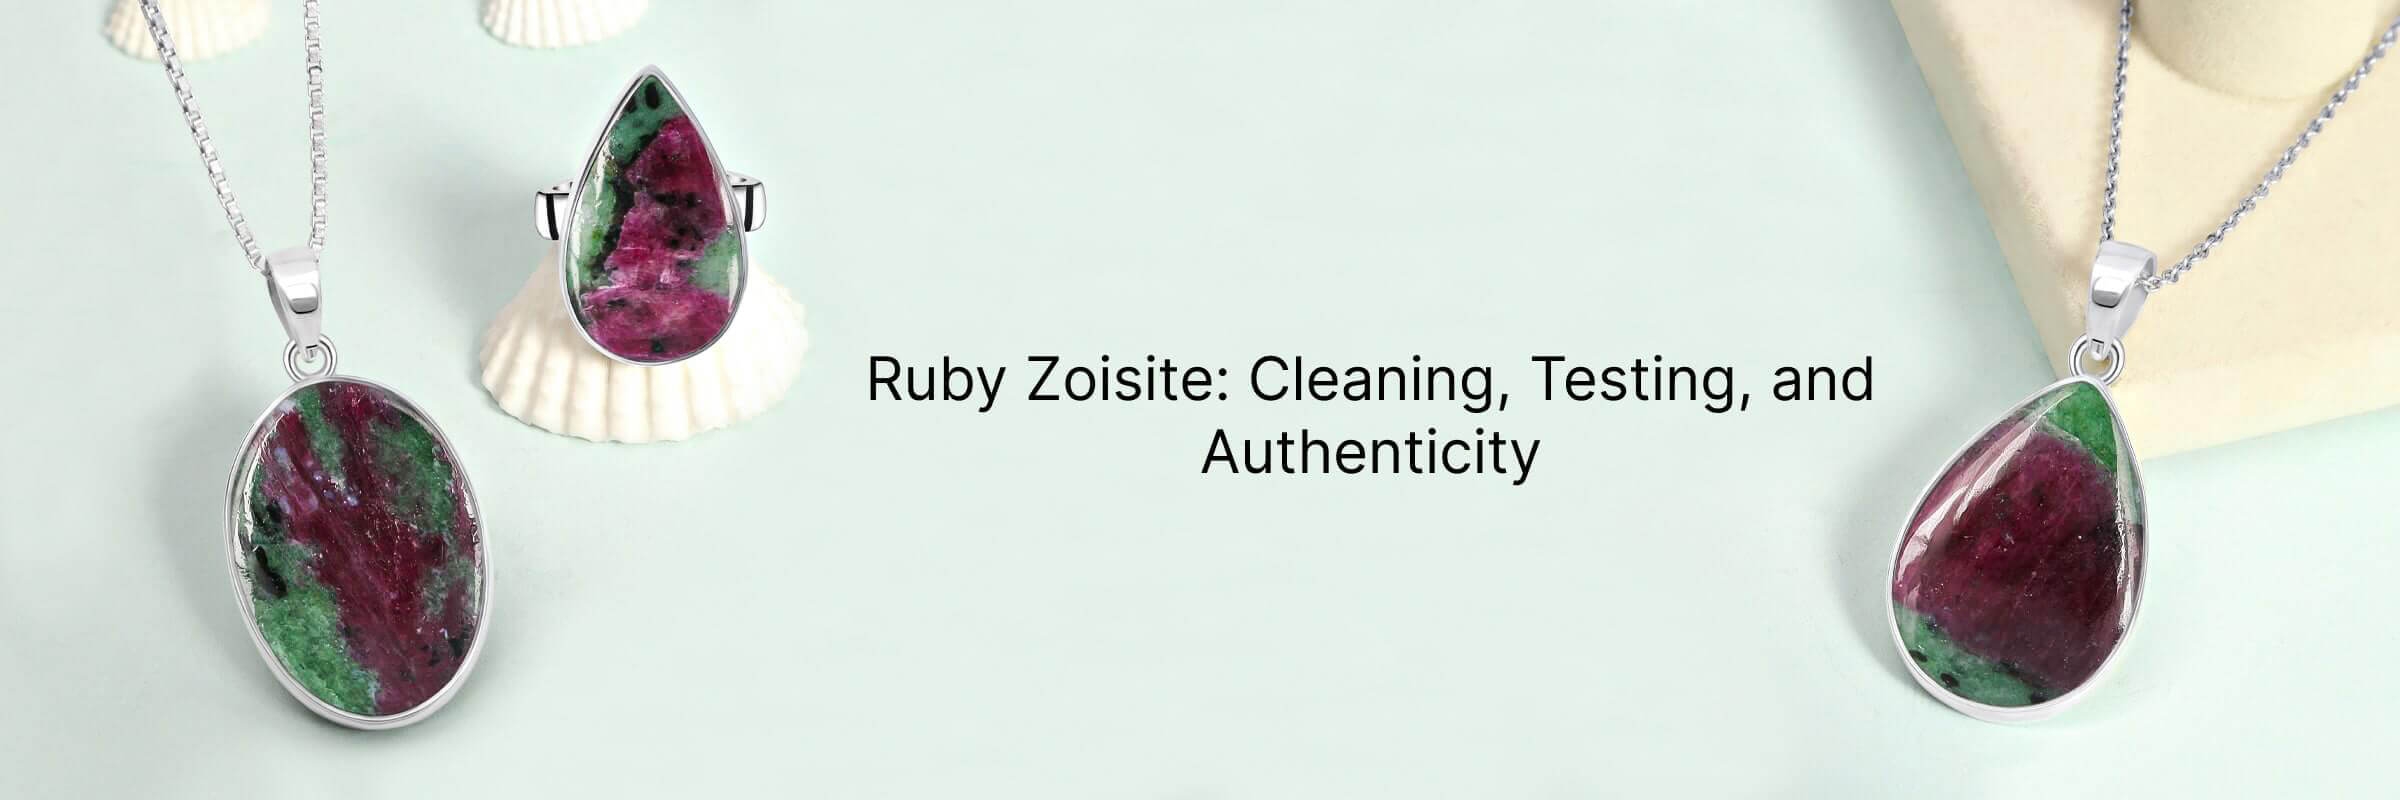 Cleaning of Ruby Zoisite stone